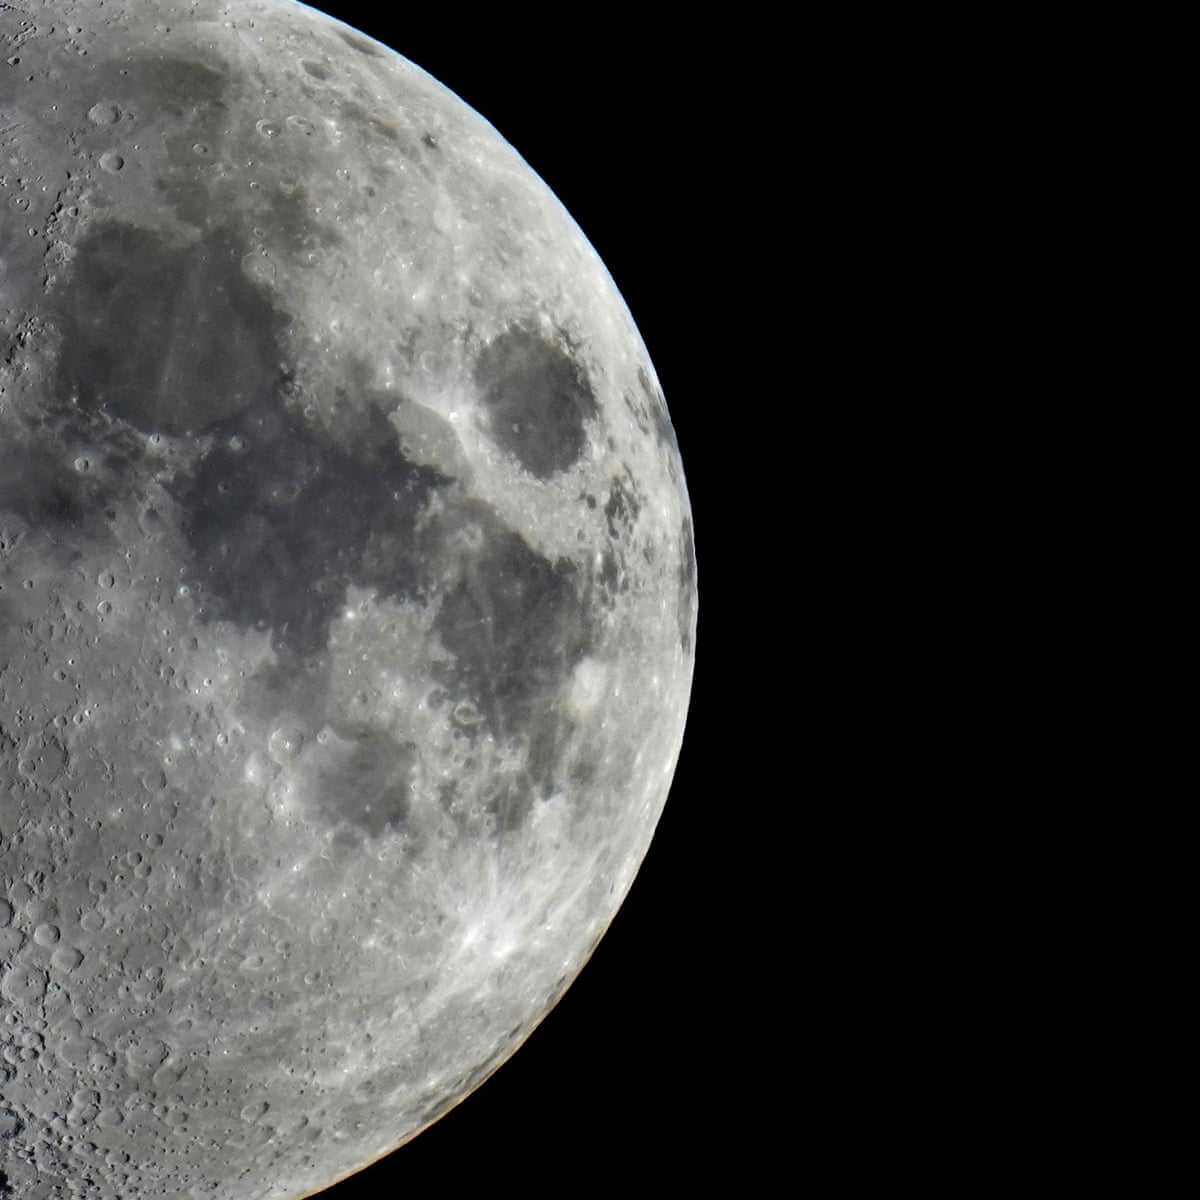 Glass beads on moon's surface may hold billions of tonnes of water ...